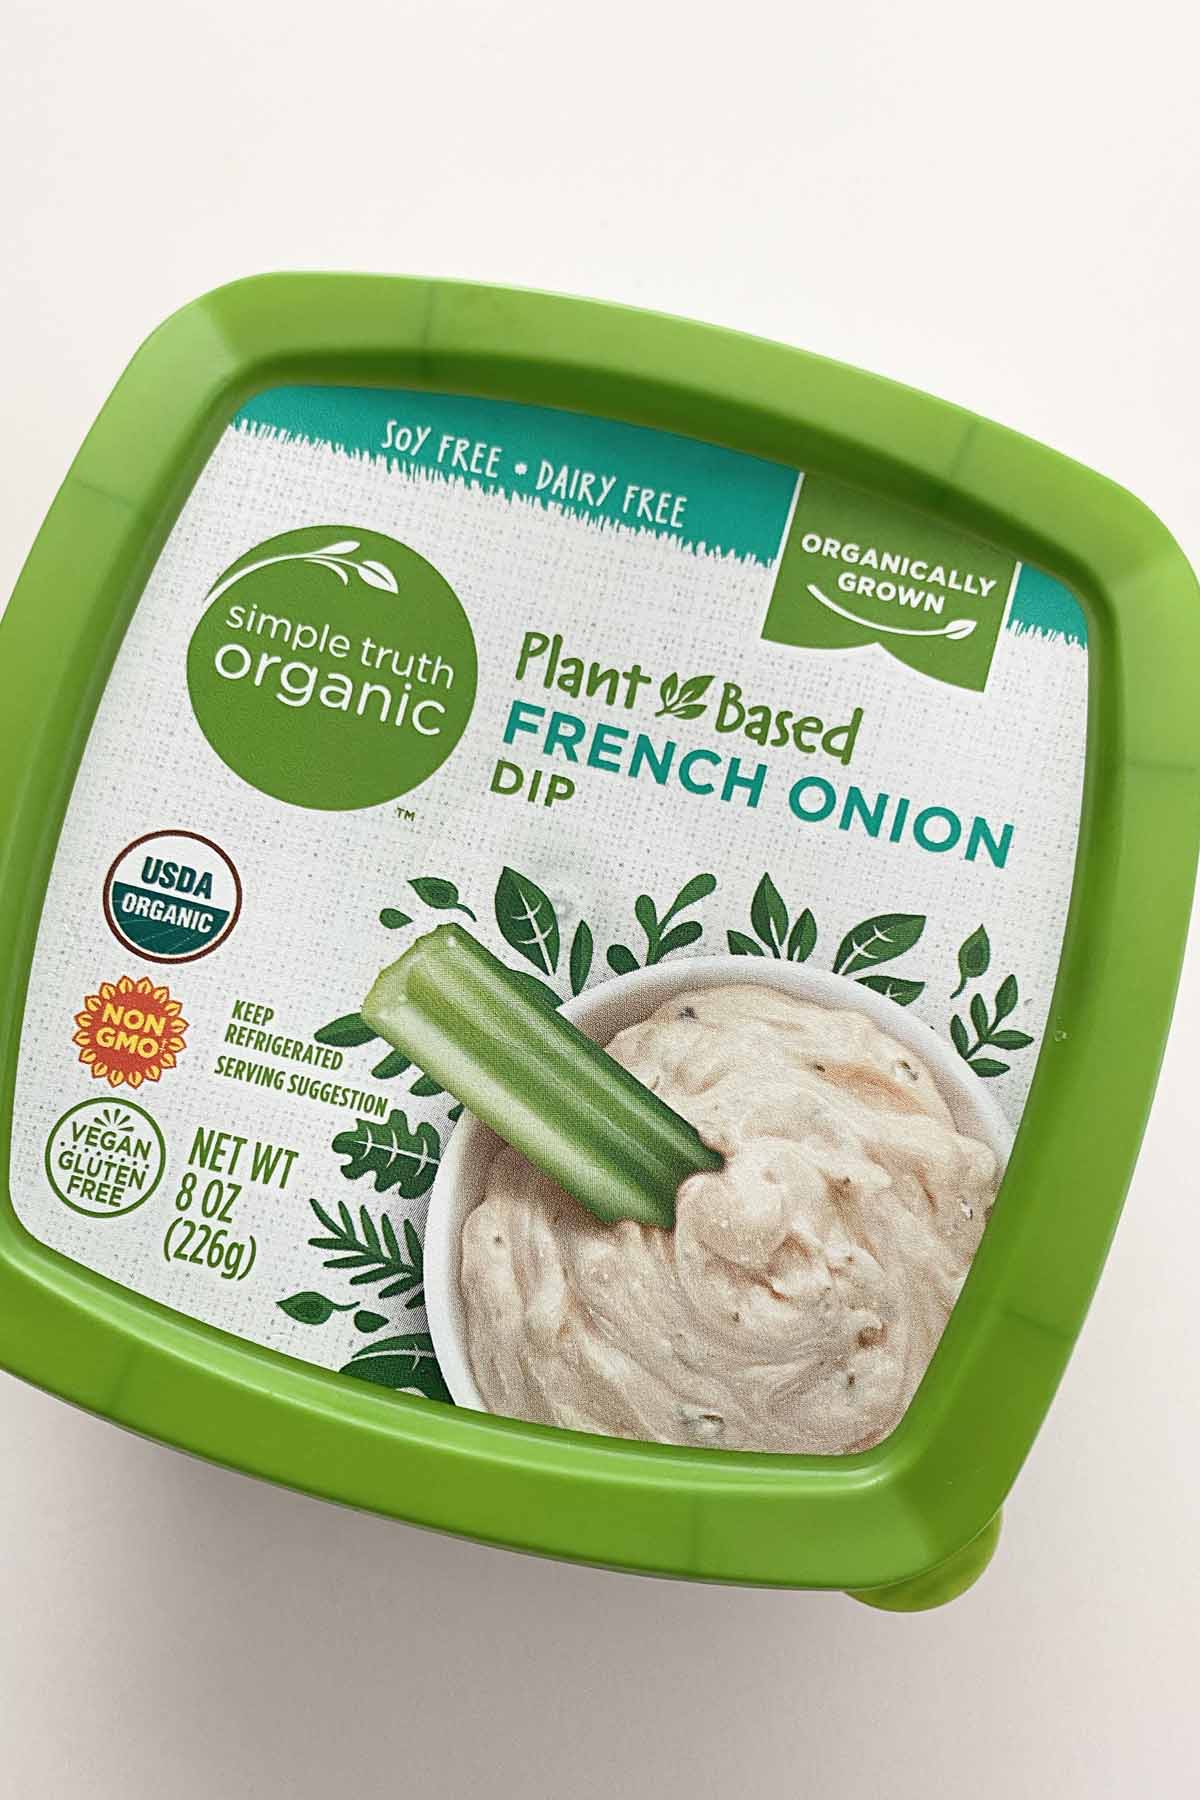 container of Simple Truth Plant-Based French Onion Dip on a white table